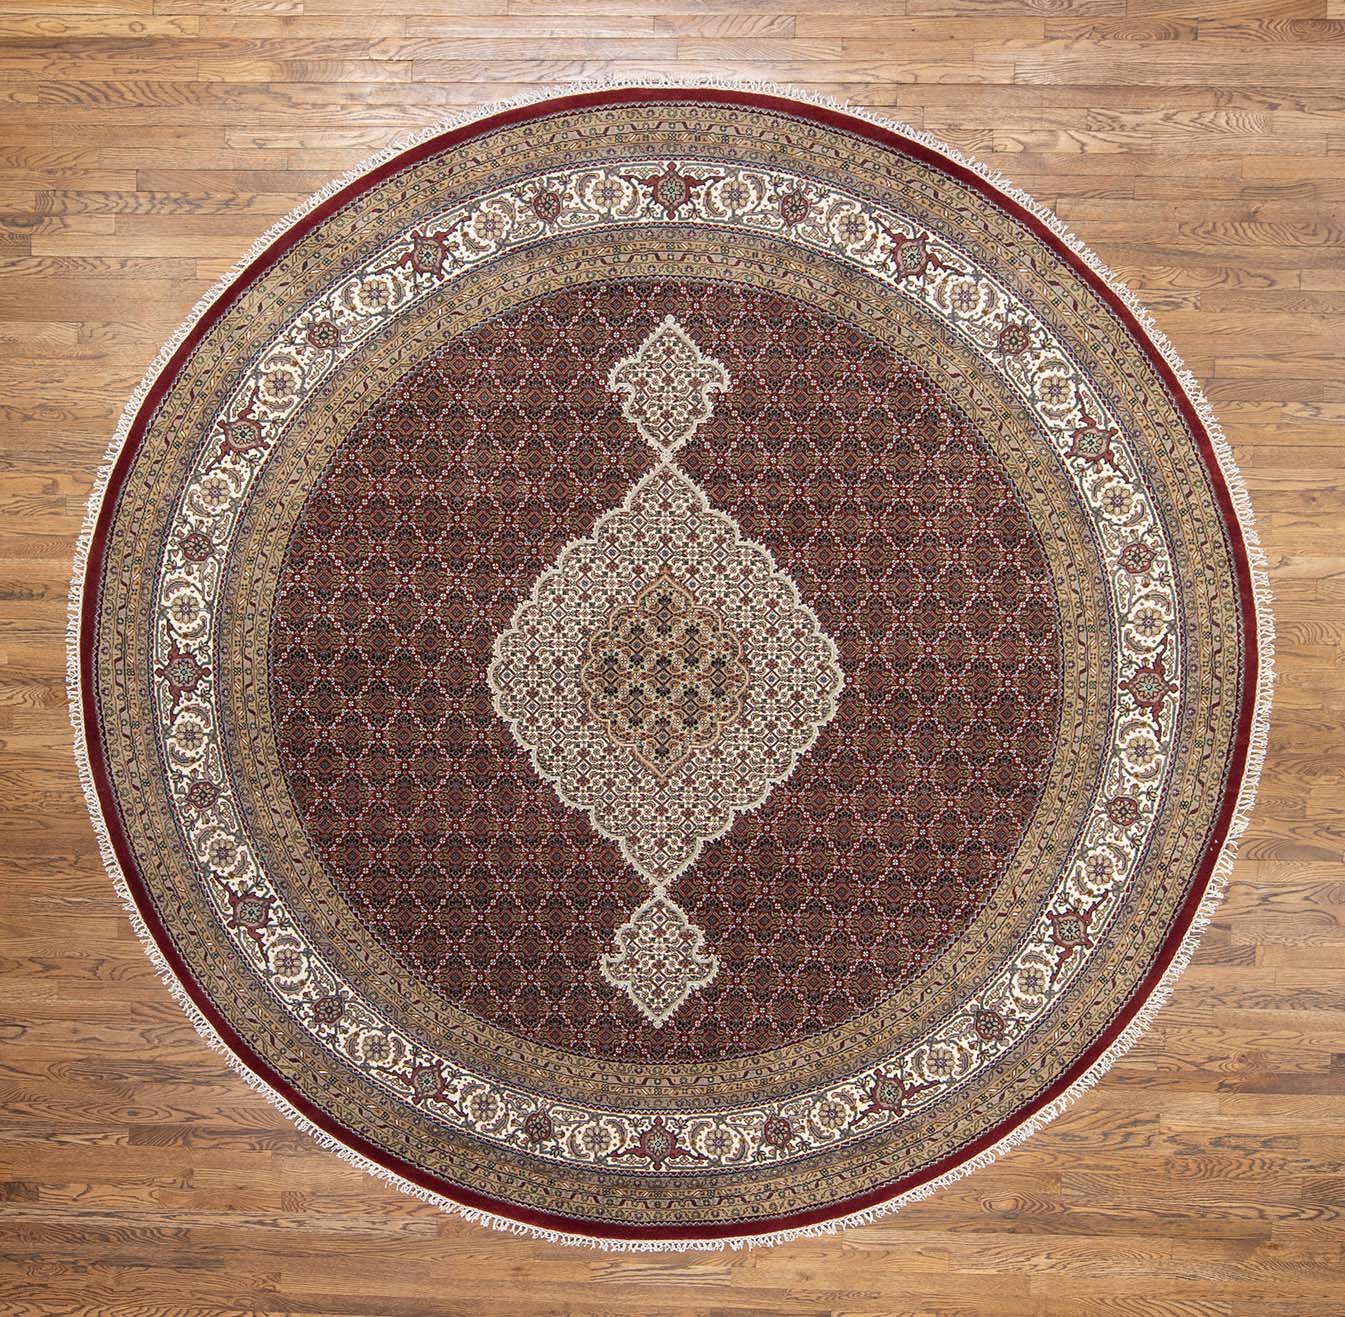 10 ft round rug. Handmade large 10x10 round rug with oval shaped center medallion in red and beige colors.